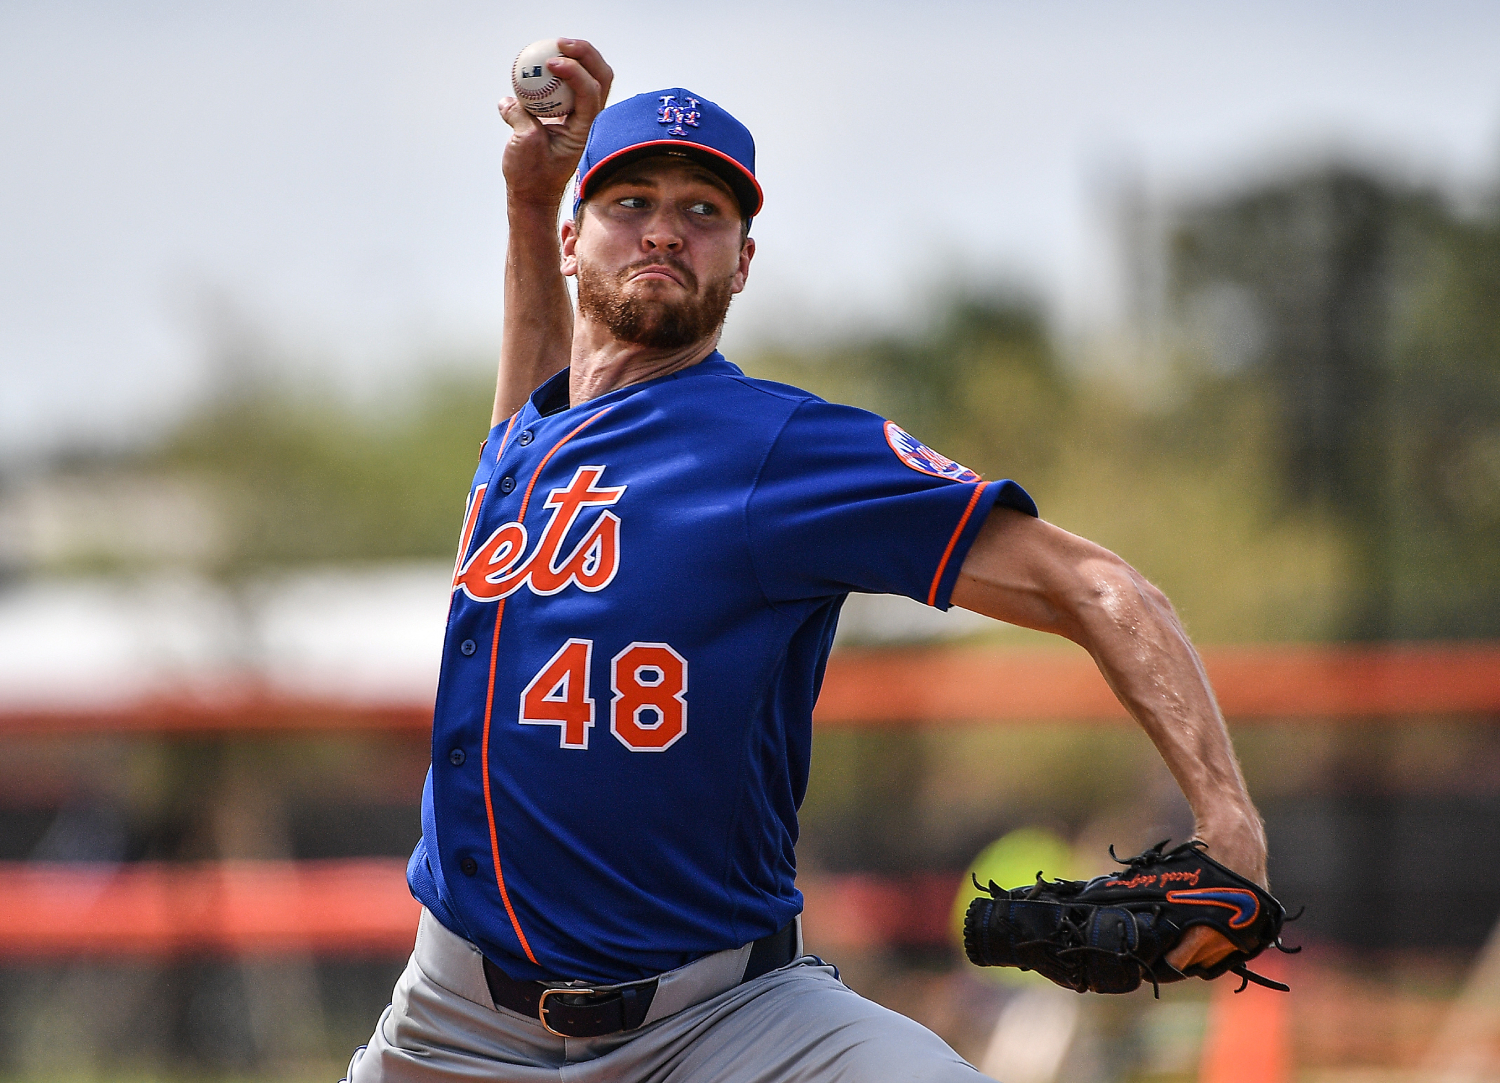 Jacob deGrom’s Cy Young Crown Could Be Taken by 1 Pitcher That Has Barely Made $1 Million